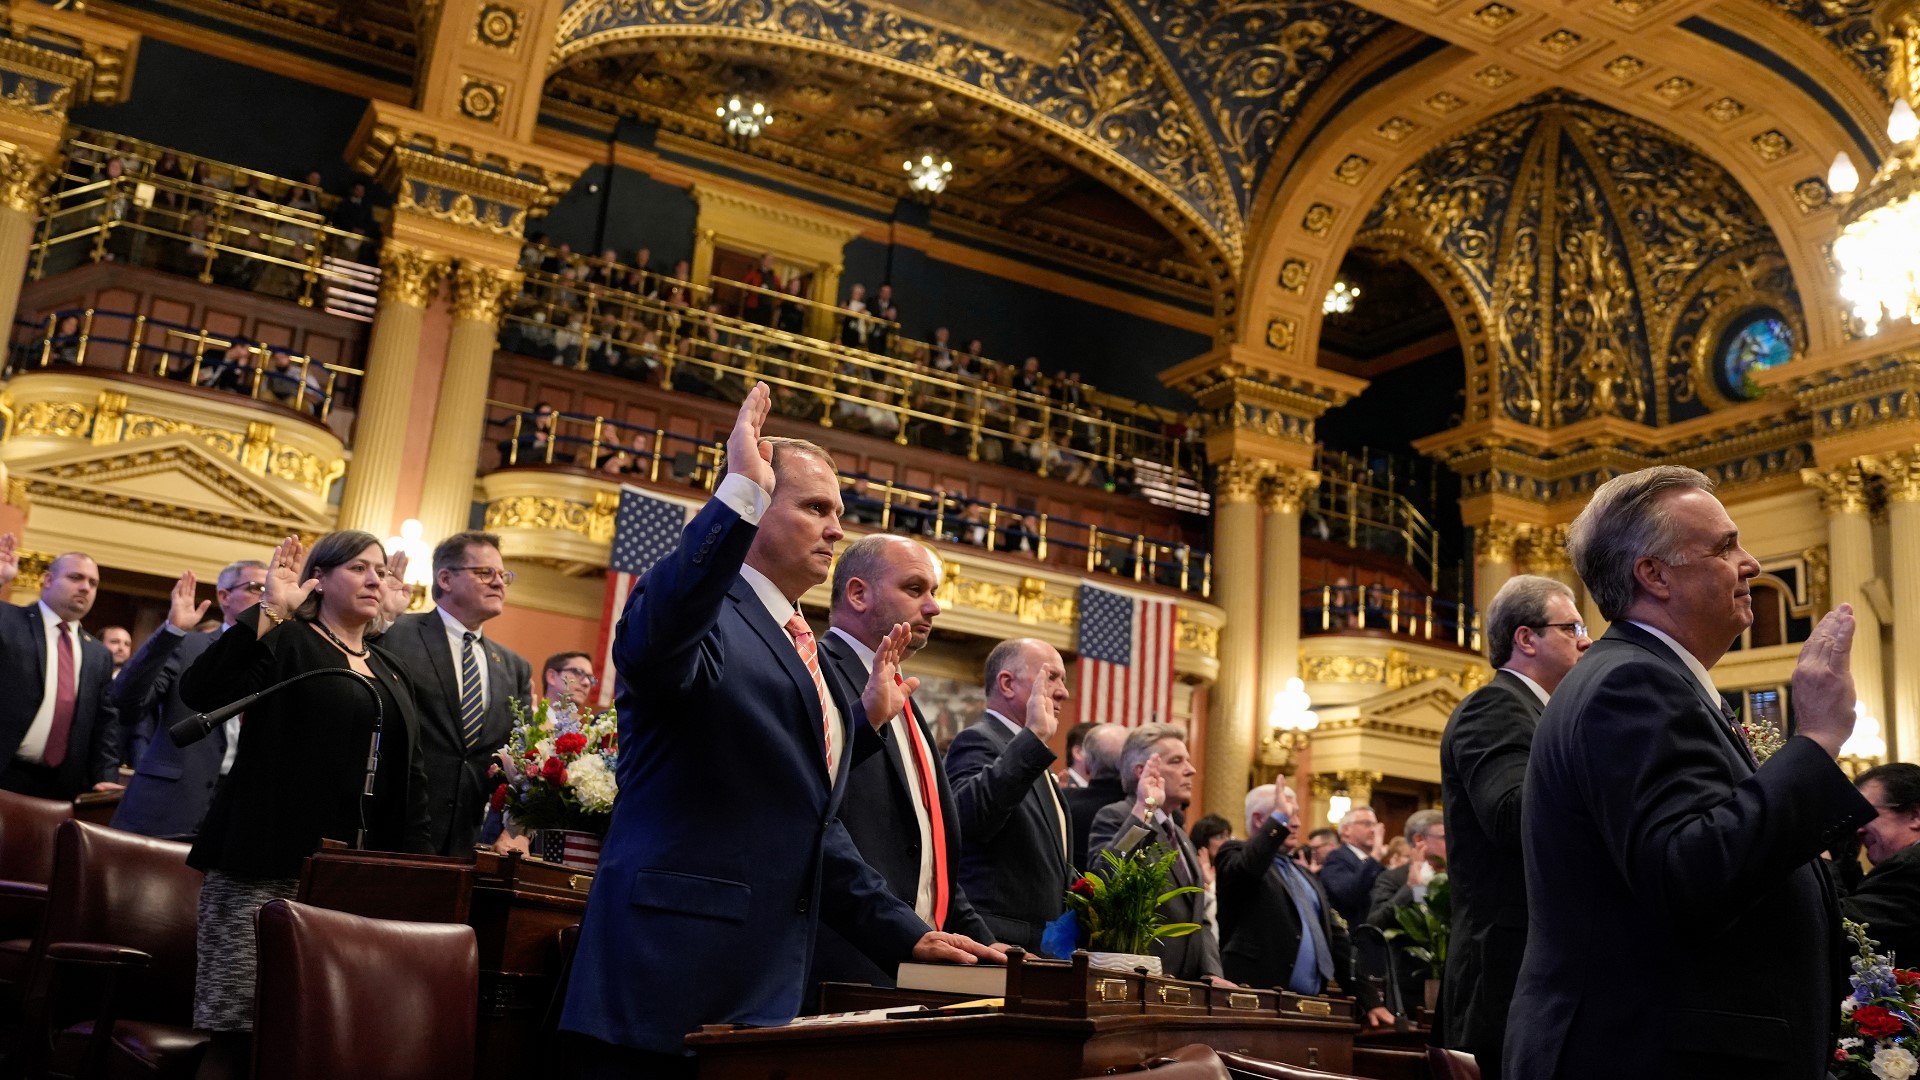 The chamber voted 115 to 85 on Tuesday to make Rep. Mark Rozzi of Berks County its speaker.